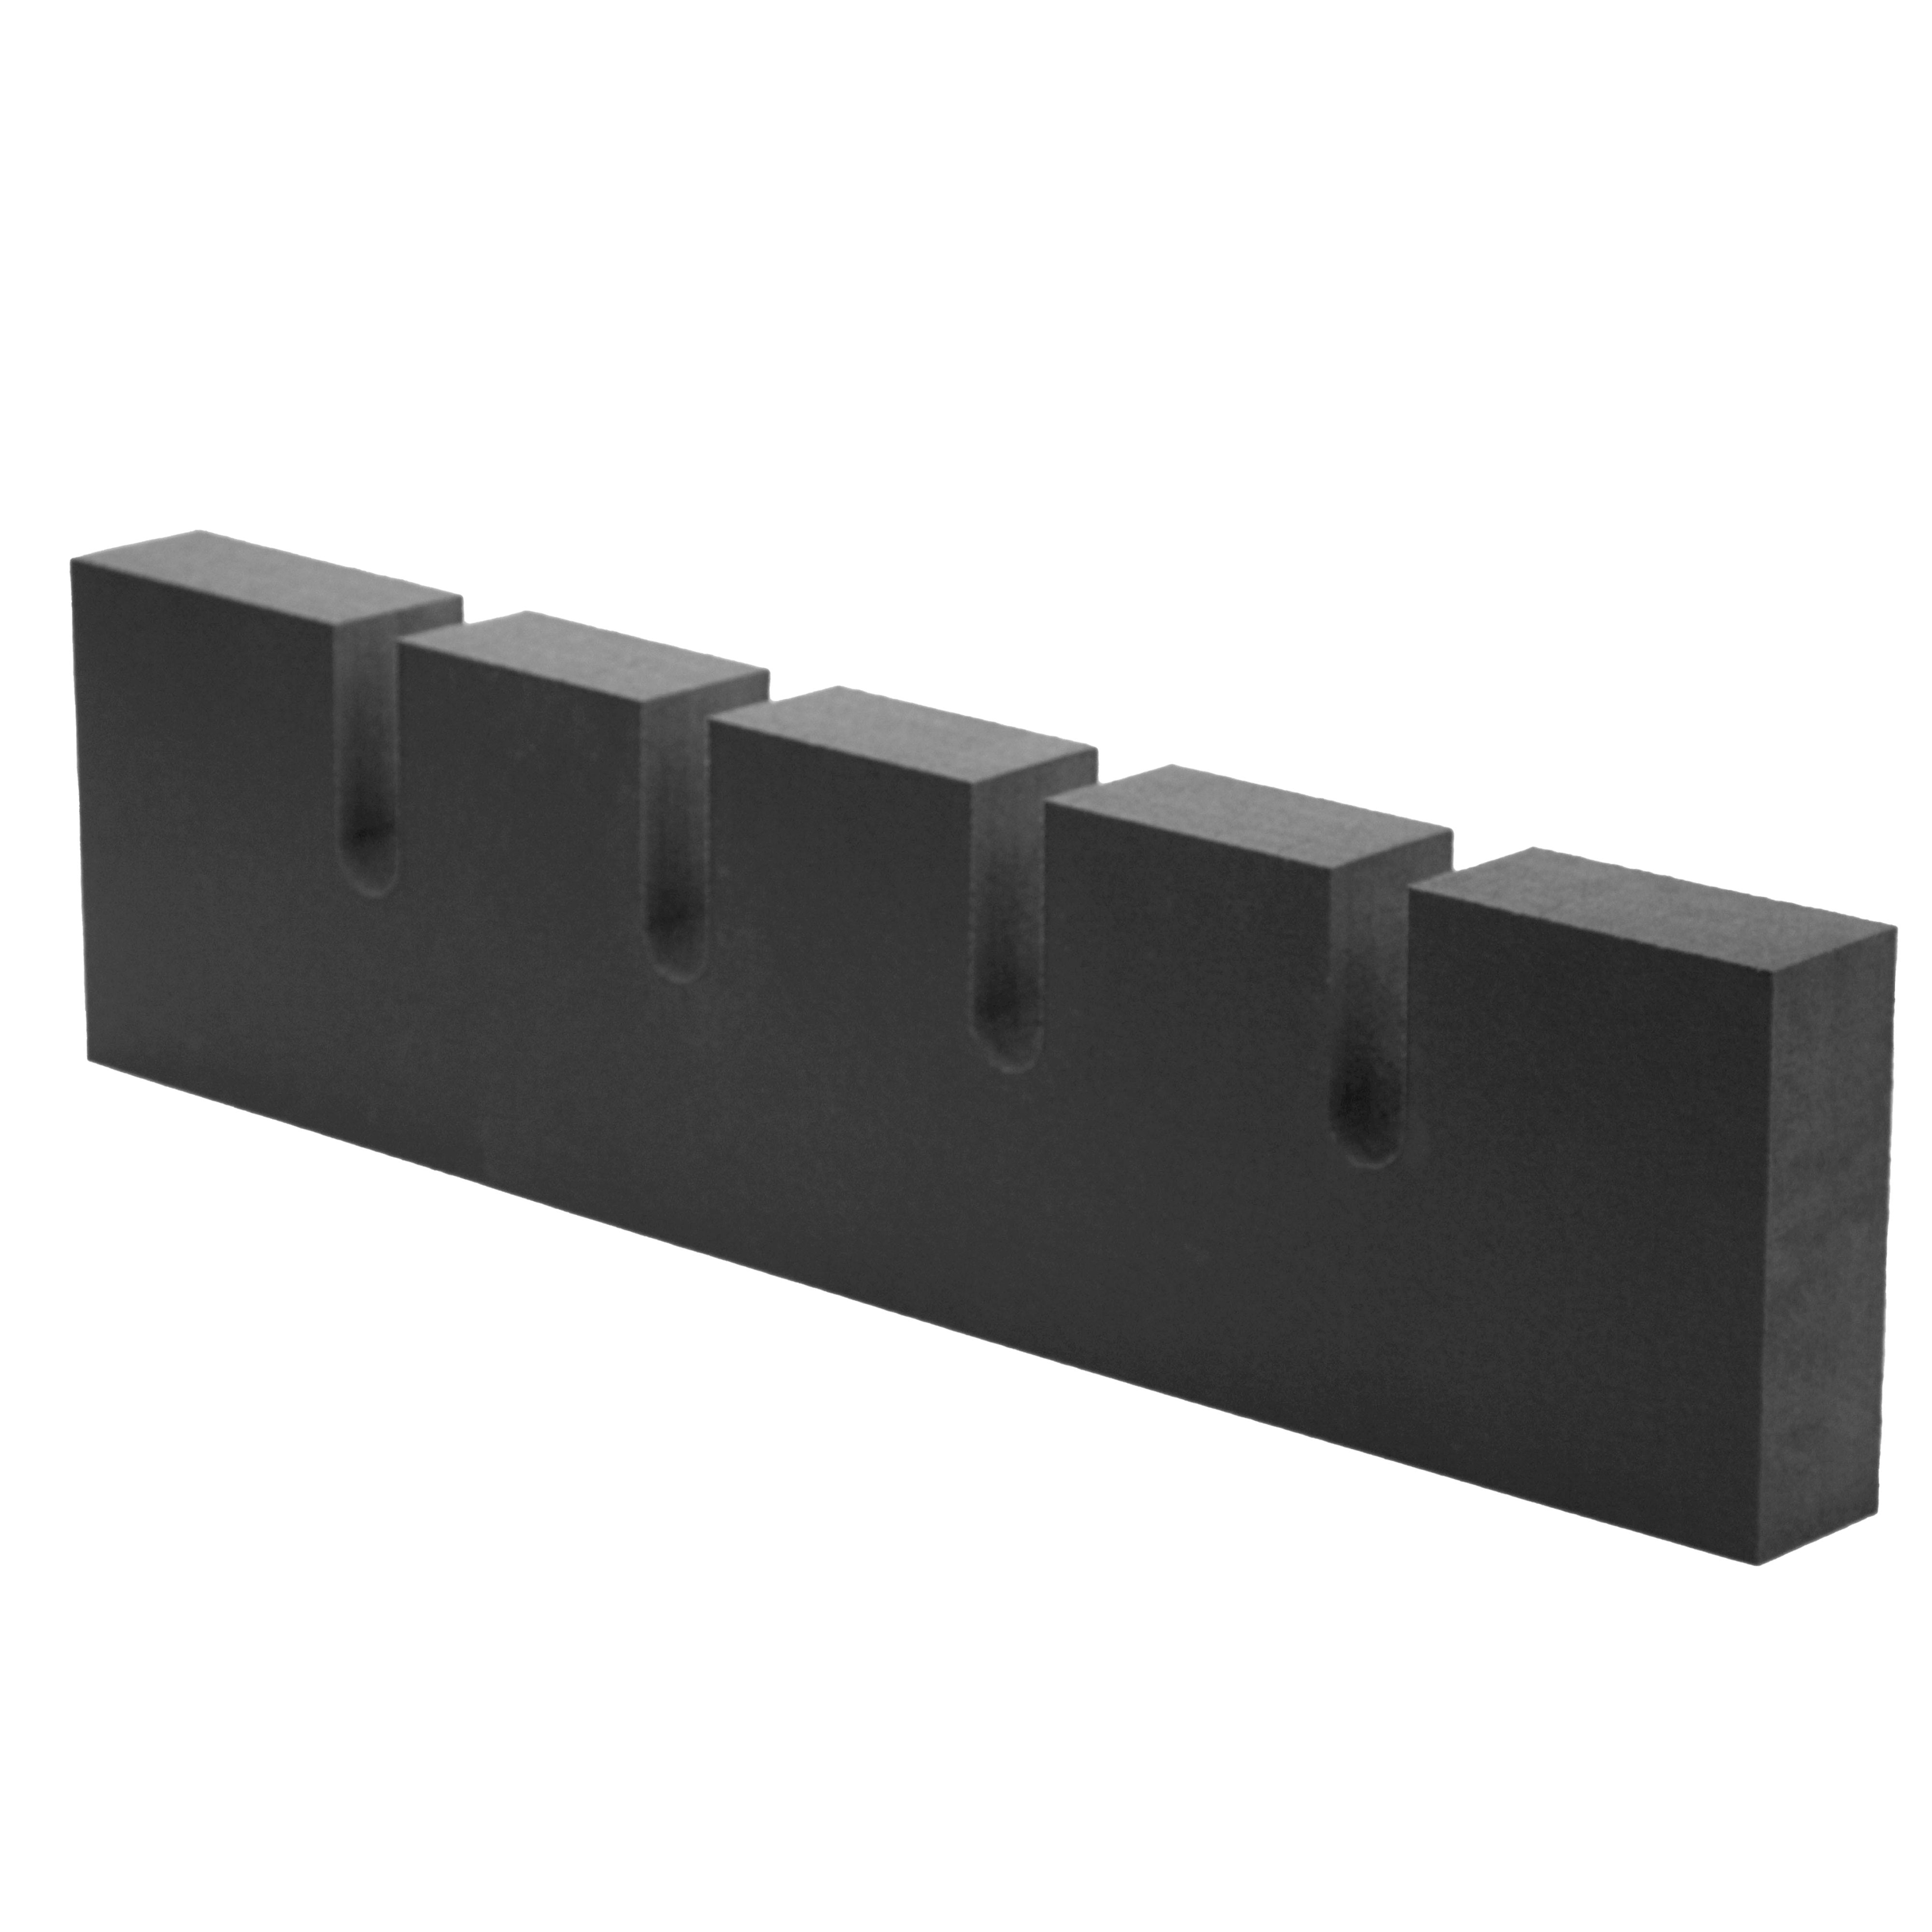 Heavy Duty Foam Dunnage Reusable Cushion for Shipping Box Crate Straight Slot 24x6x2 1 Pack